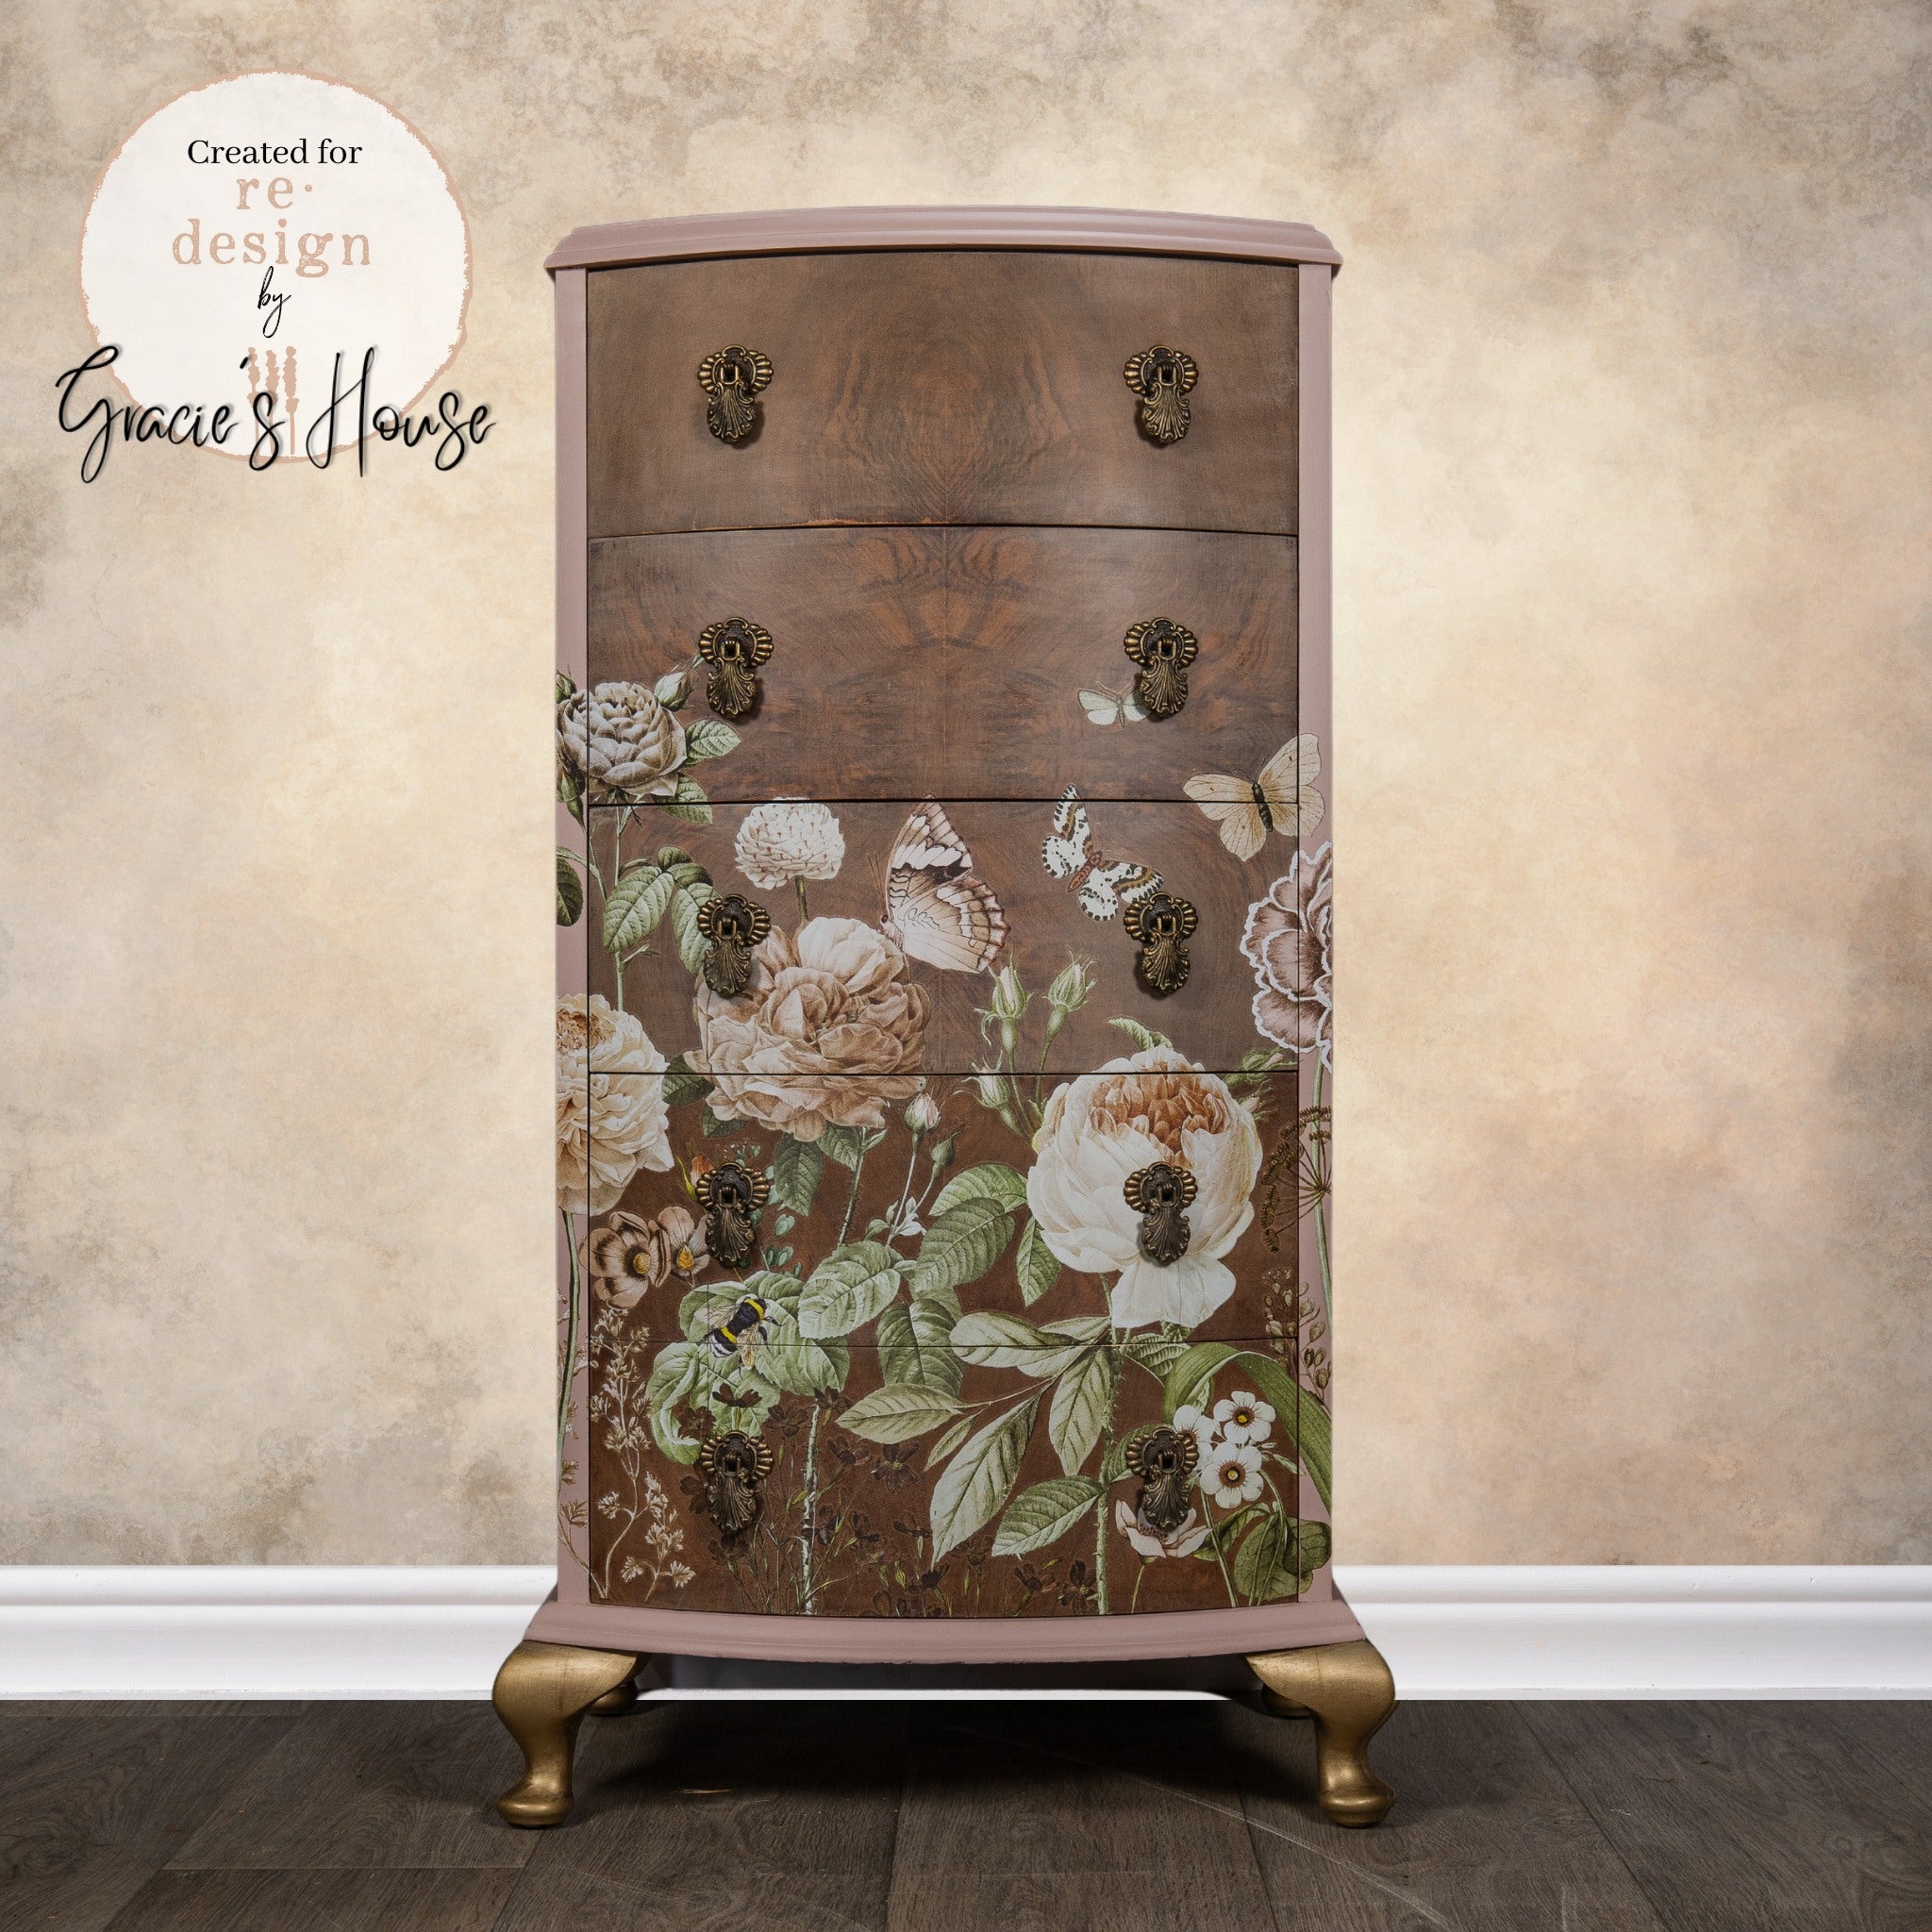 A vintage 5-drawer chest dresser refurbished by Gracie's House is painted mauve with bronze accents and features ReDesign with Prima's All the Flowers transfer on natural dark wood drawers.